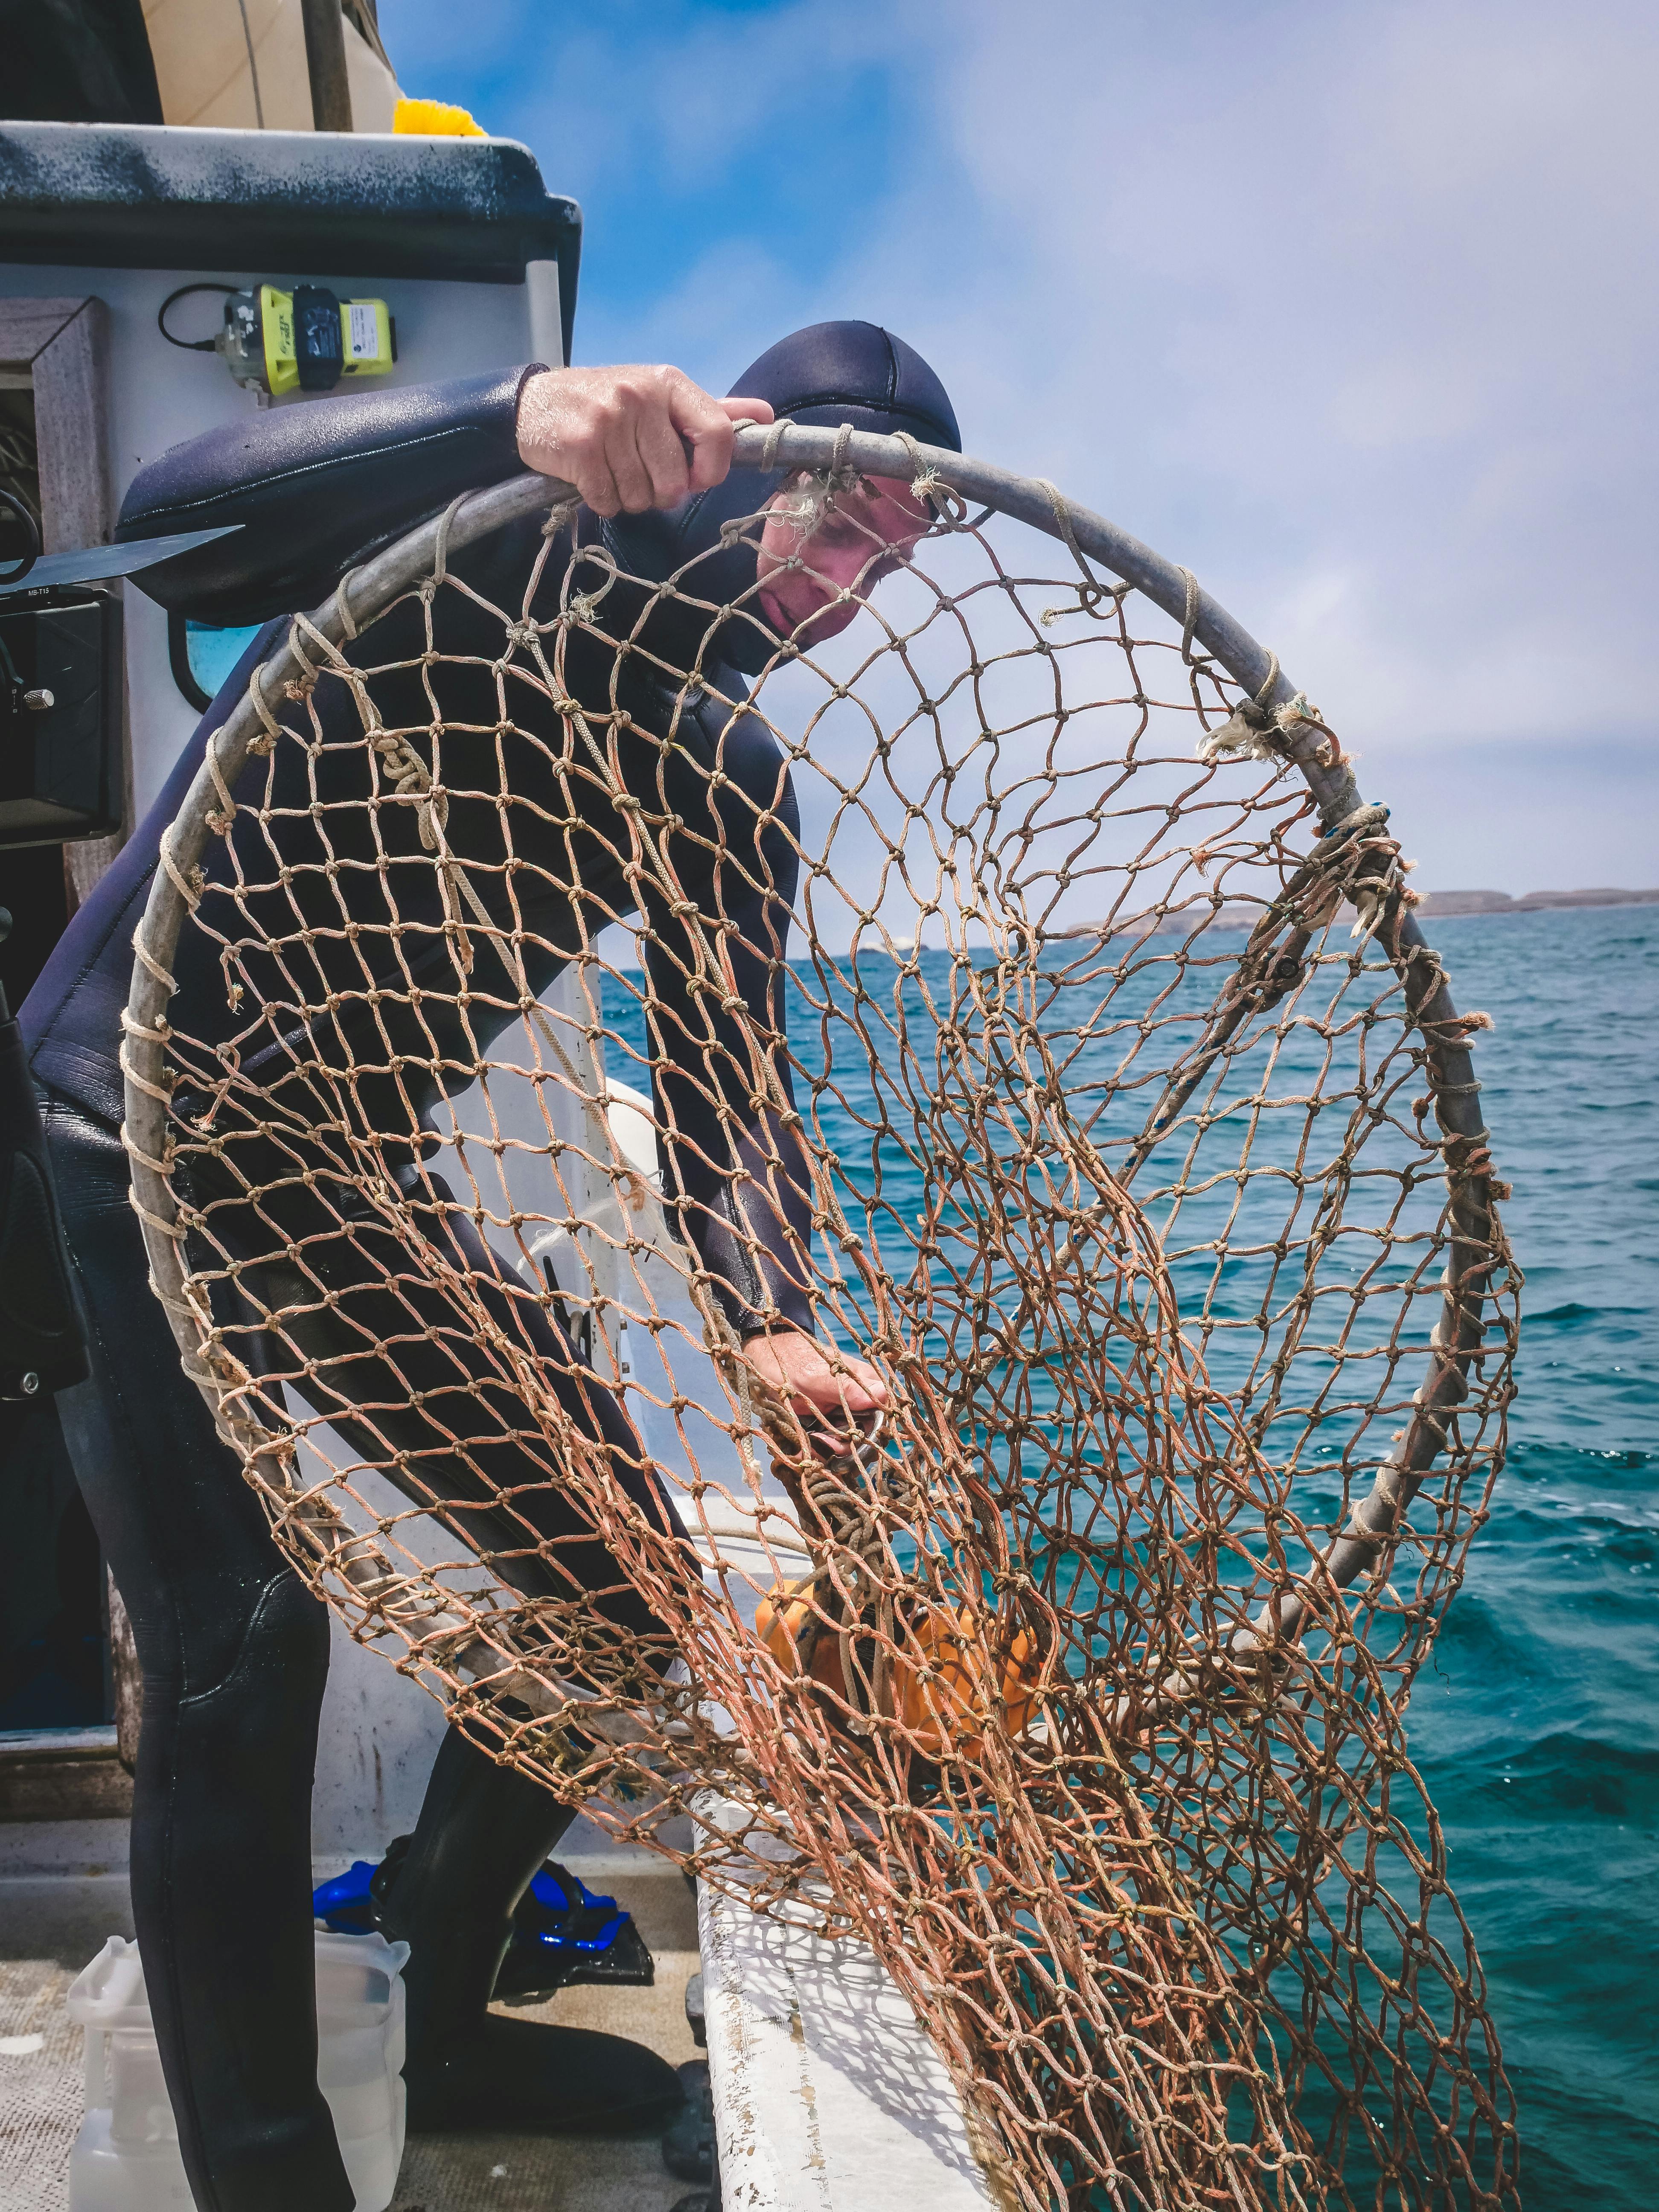 Fishing Net Marker in the Sea Stock Photo - Image of buoy, fish: 197610744